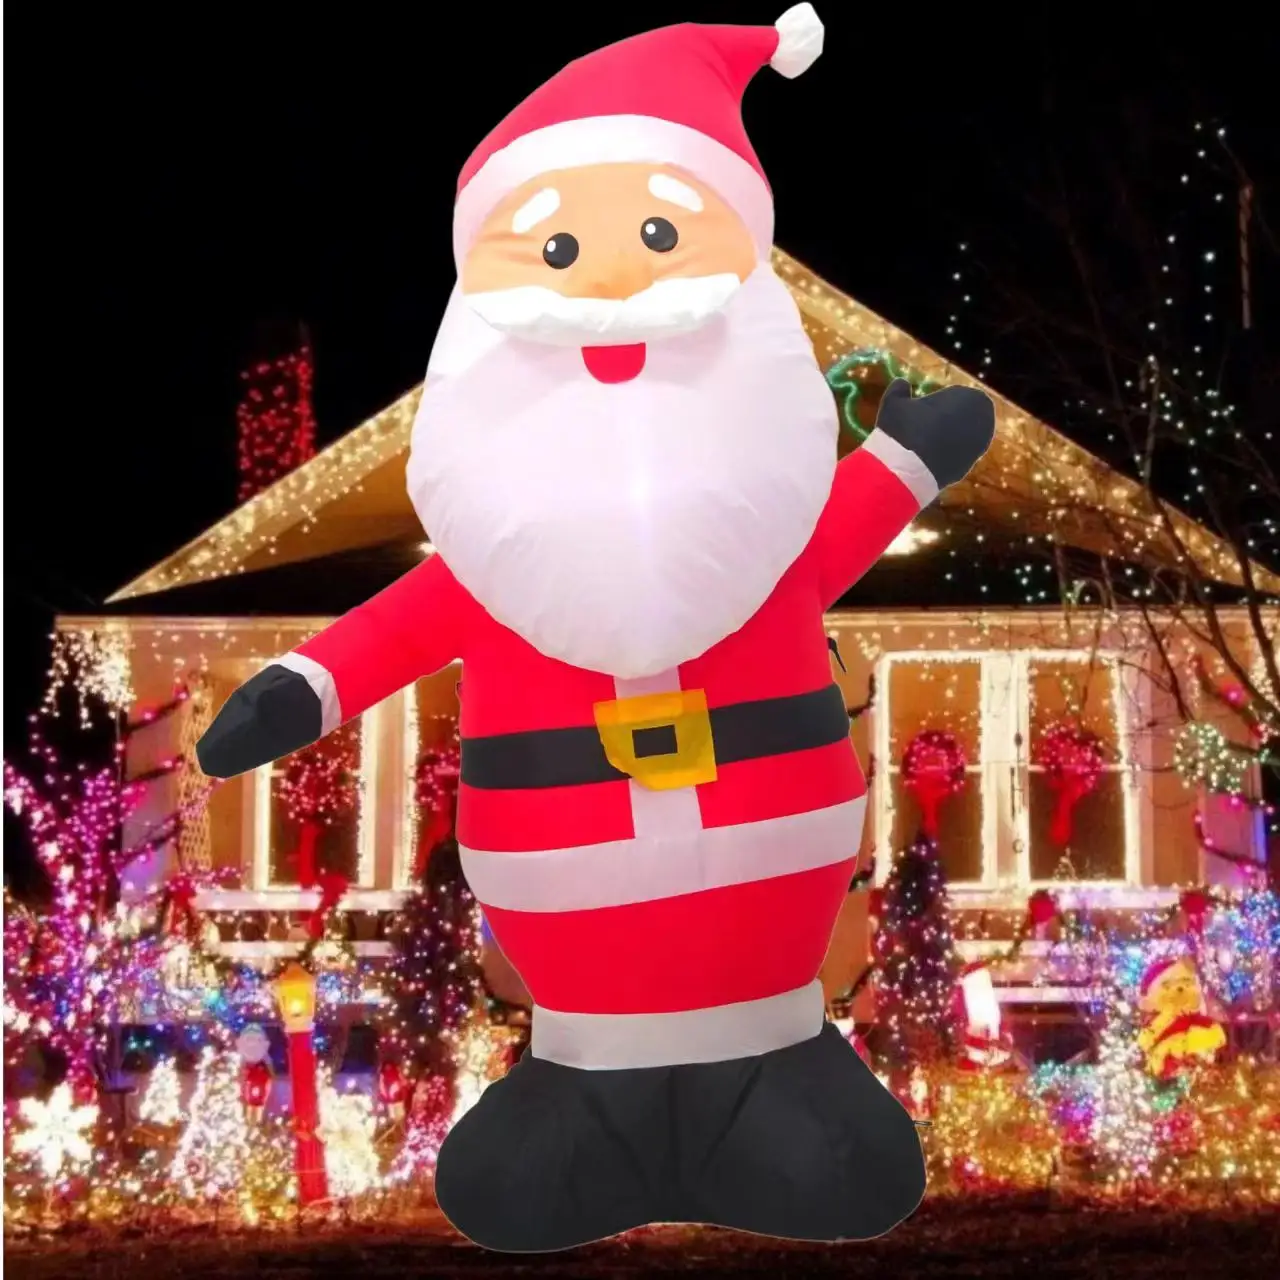 8 FT Giant Christmas Inflatable Santa Claus Outdoor Decoration for Yard Holiday Party Decor for Garden Lawn Built-in LED Light